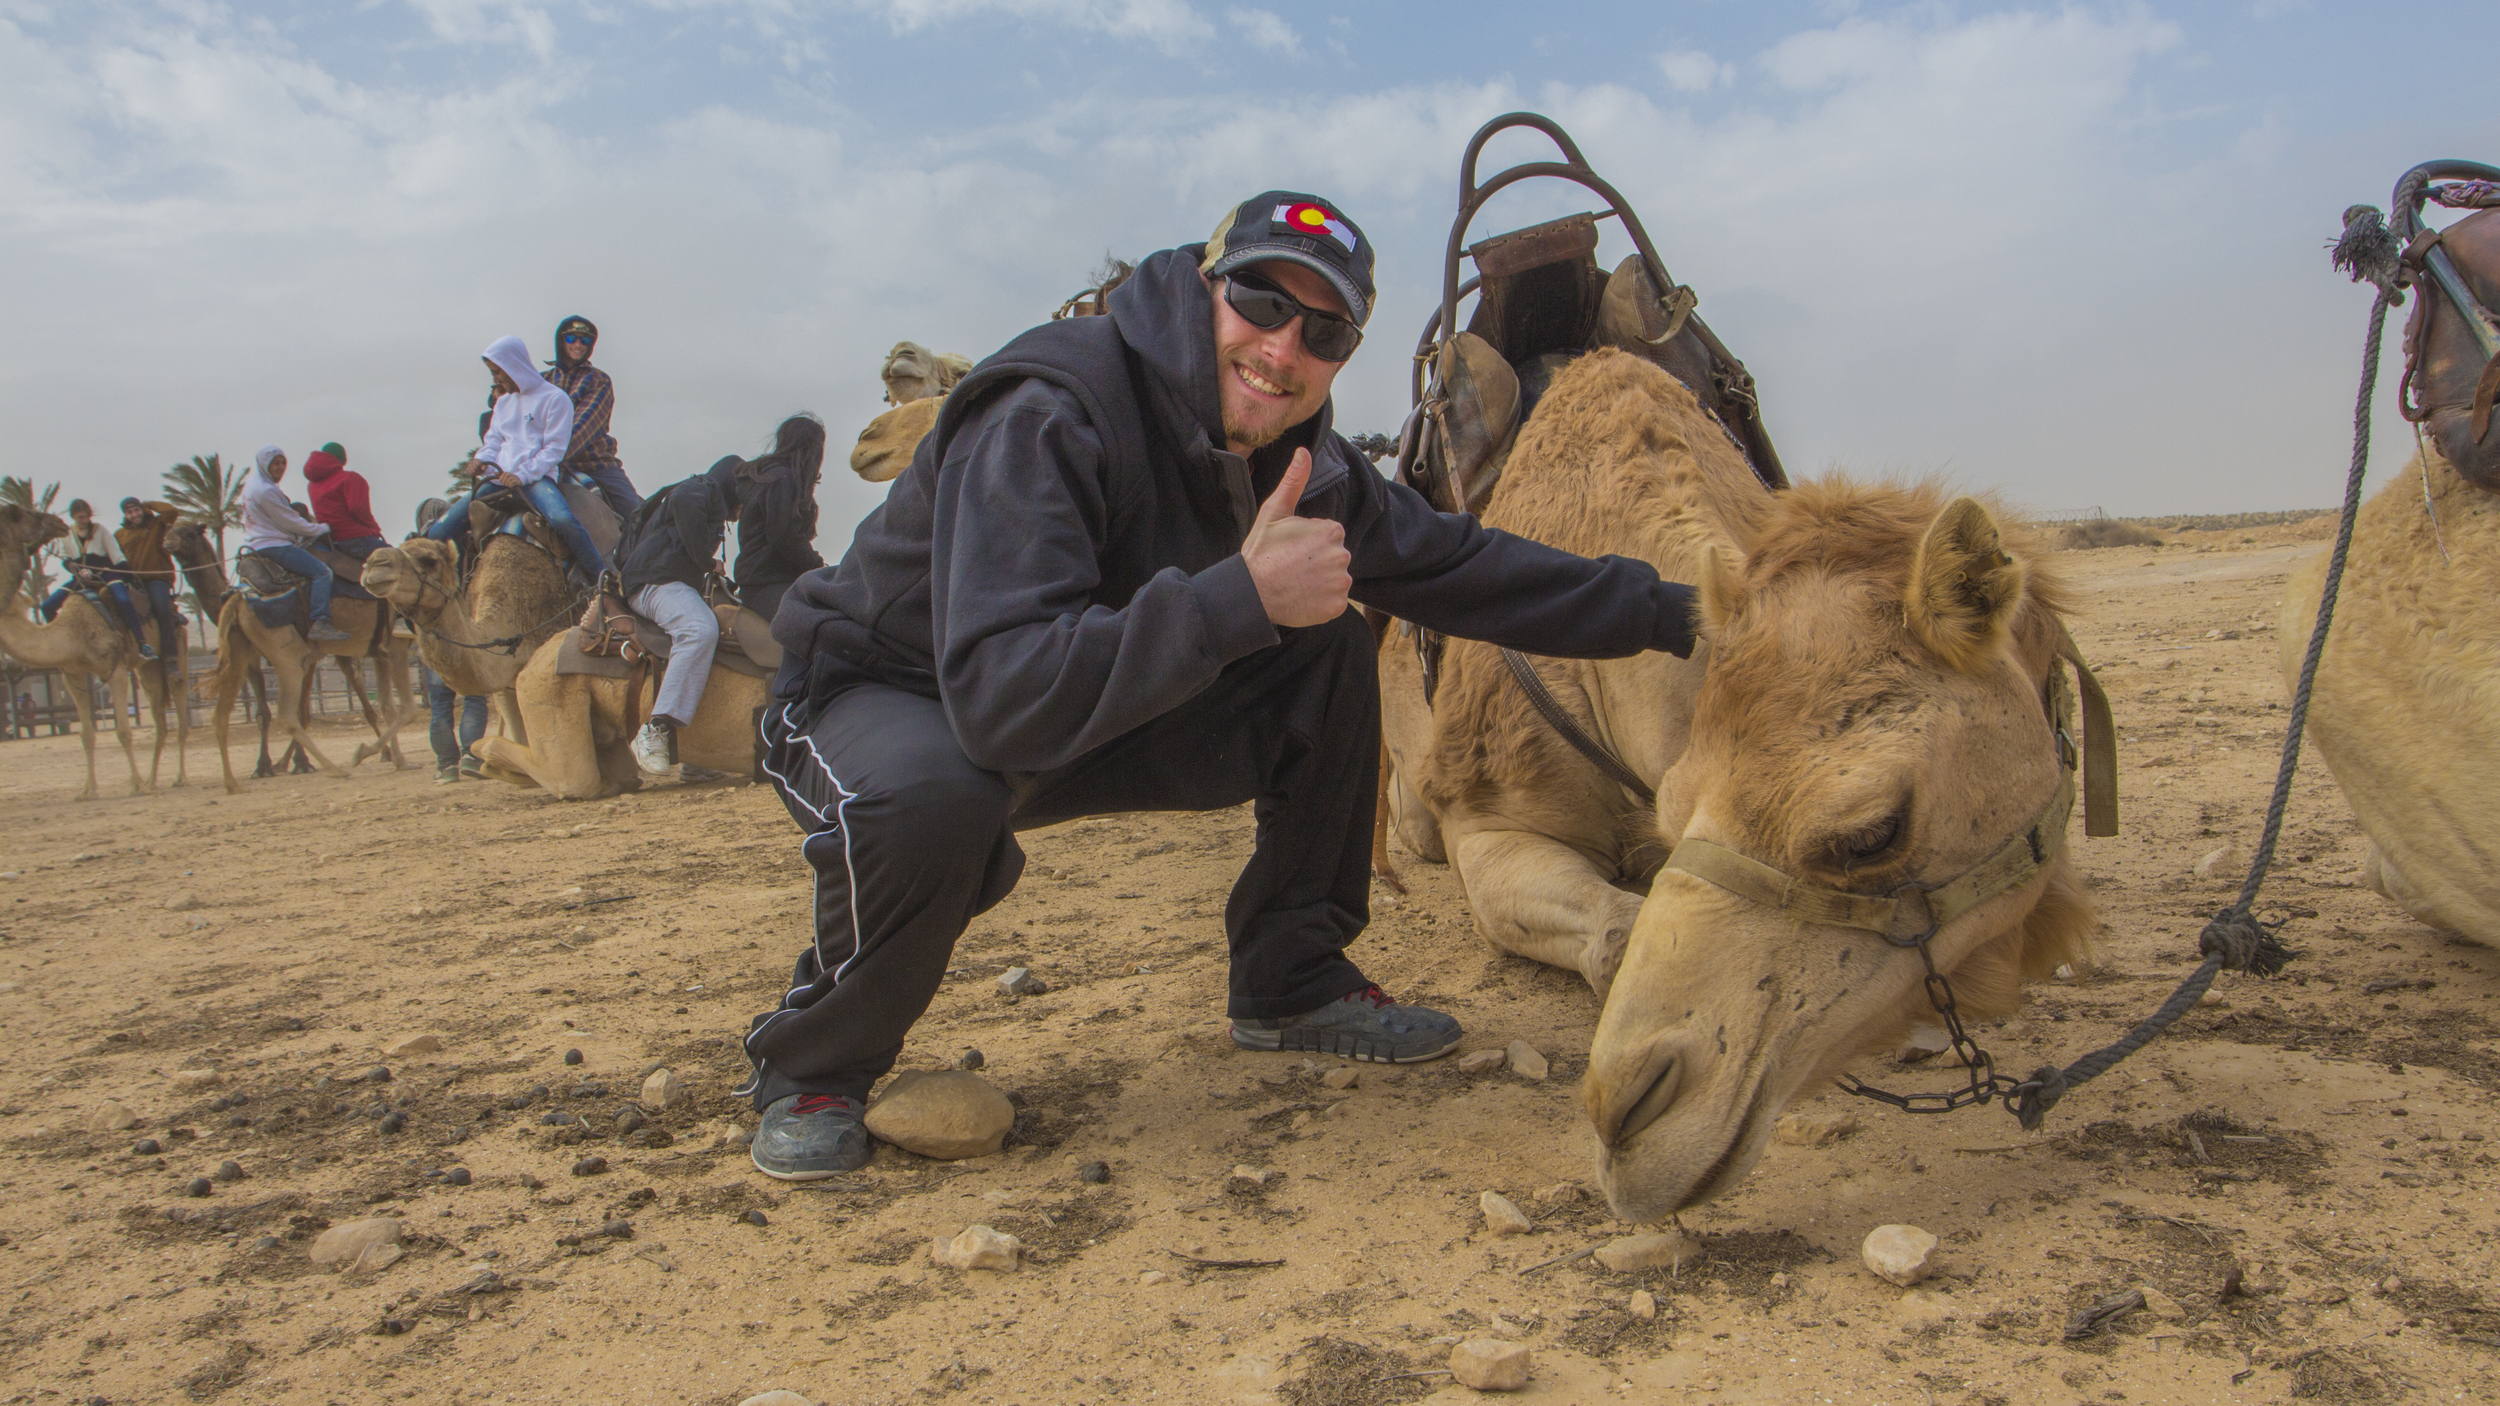 adam with our camel.jpg